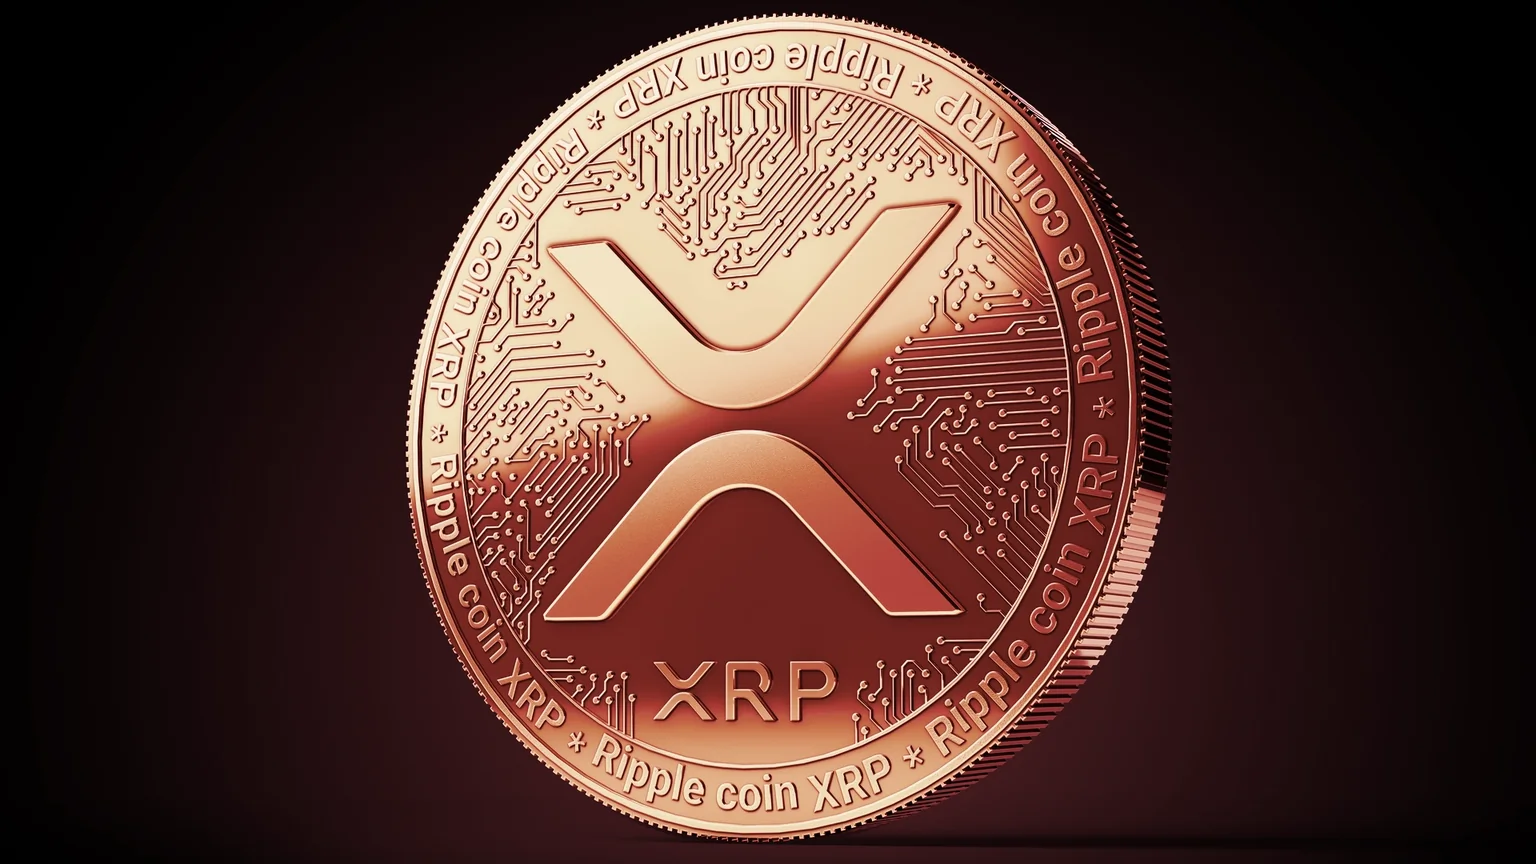 XRP is the fourth largest cryptocurrency by market cap. Image: Shutterstock